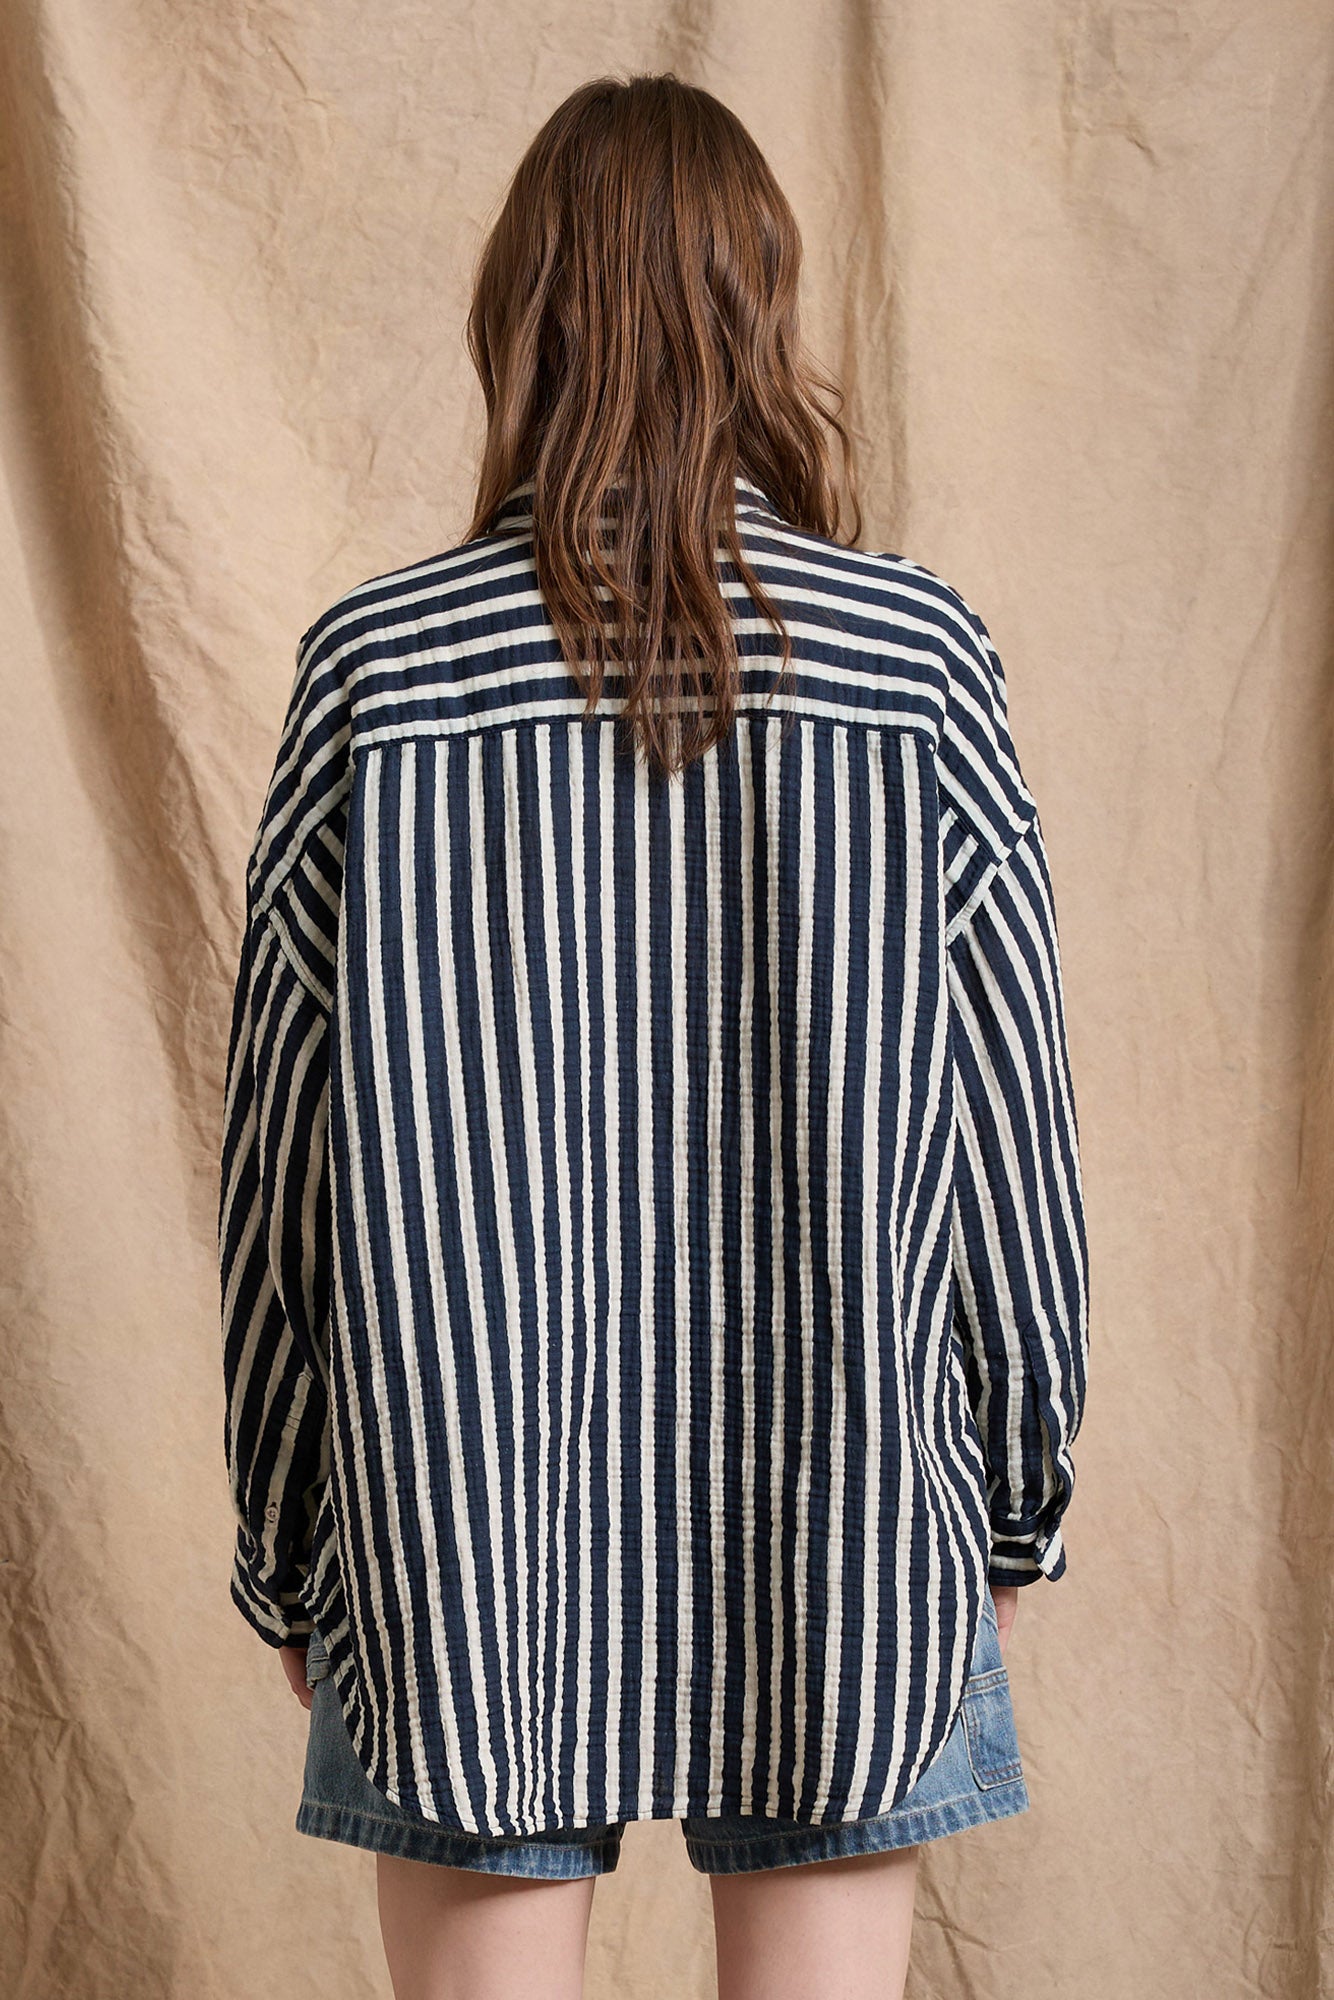 Button Front Shirt - Navy Stripe Crinkle Cotton